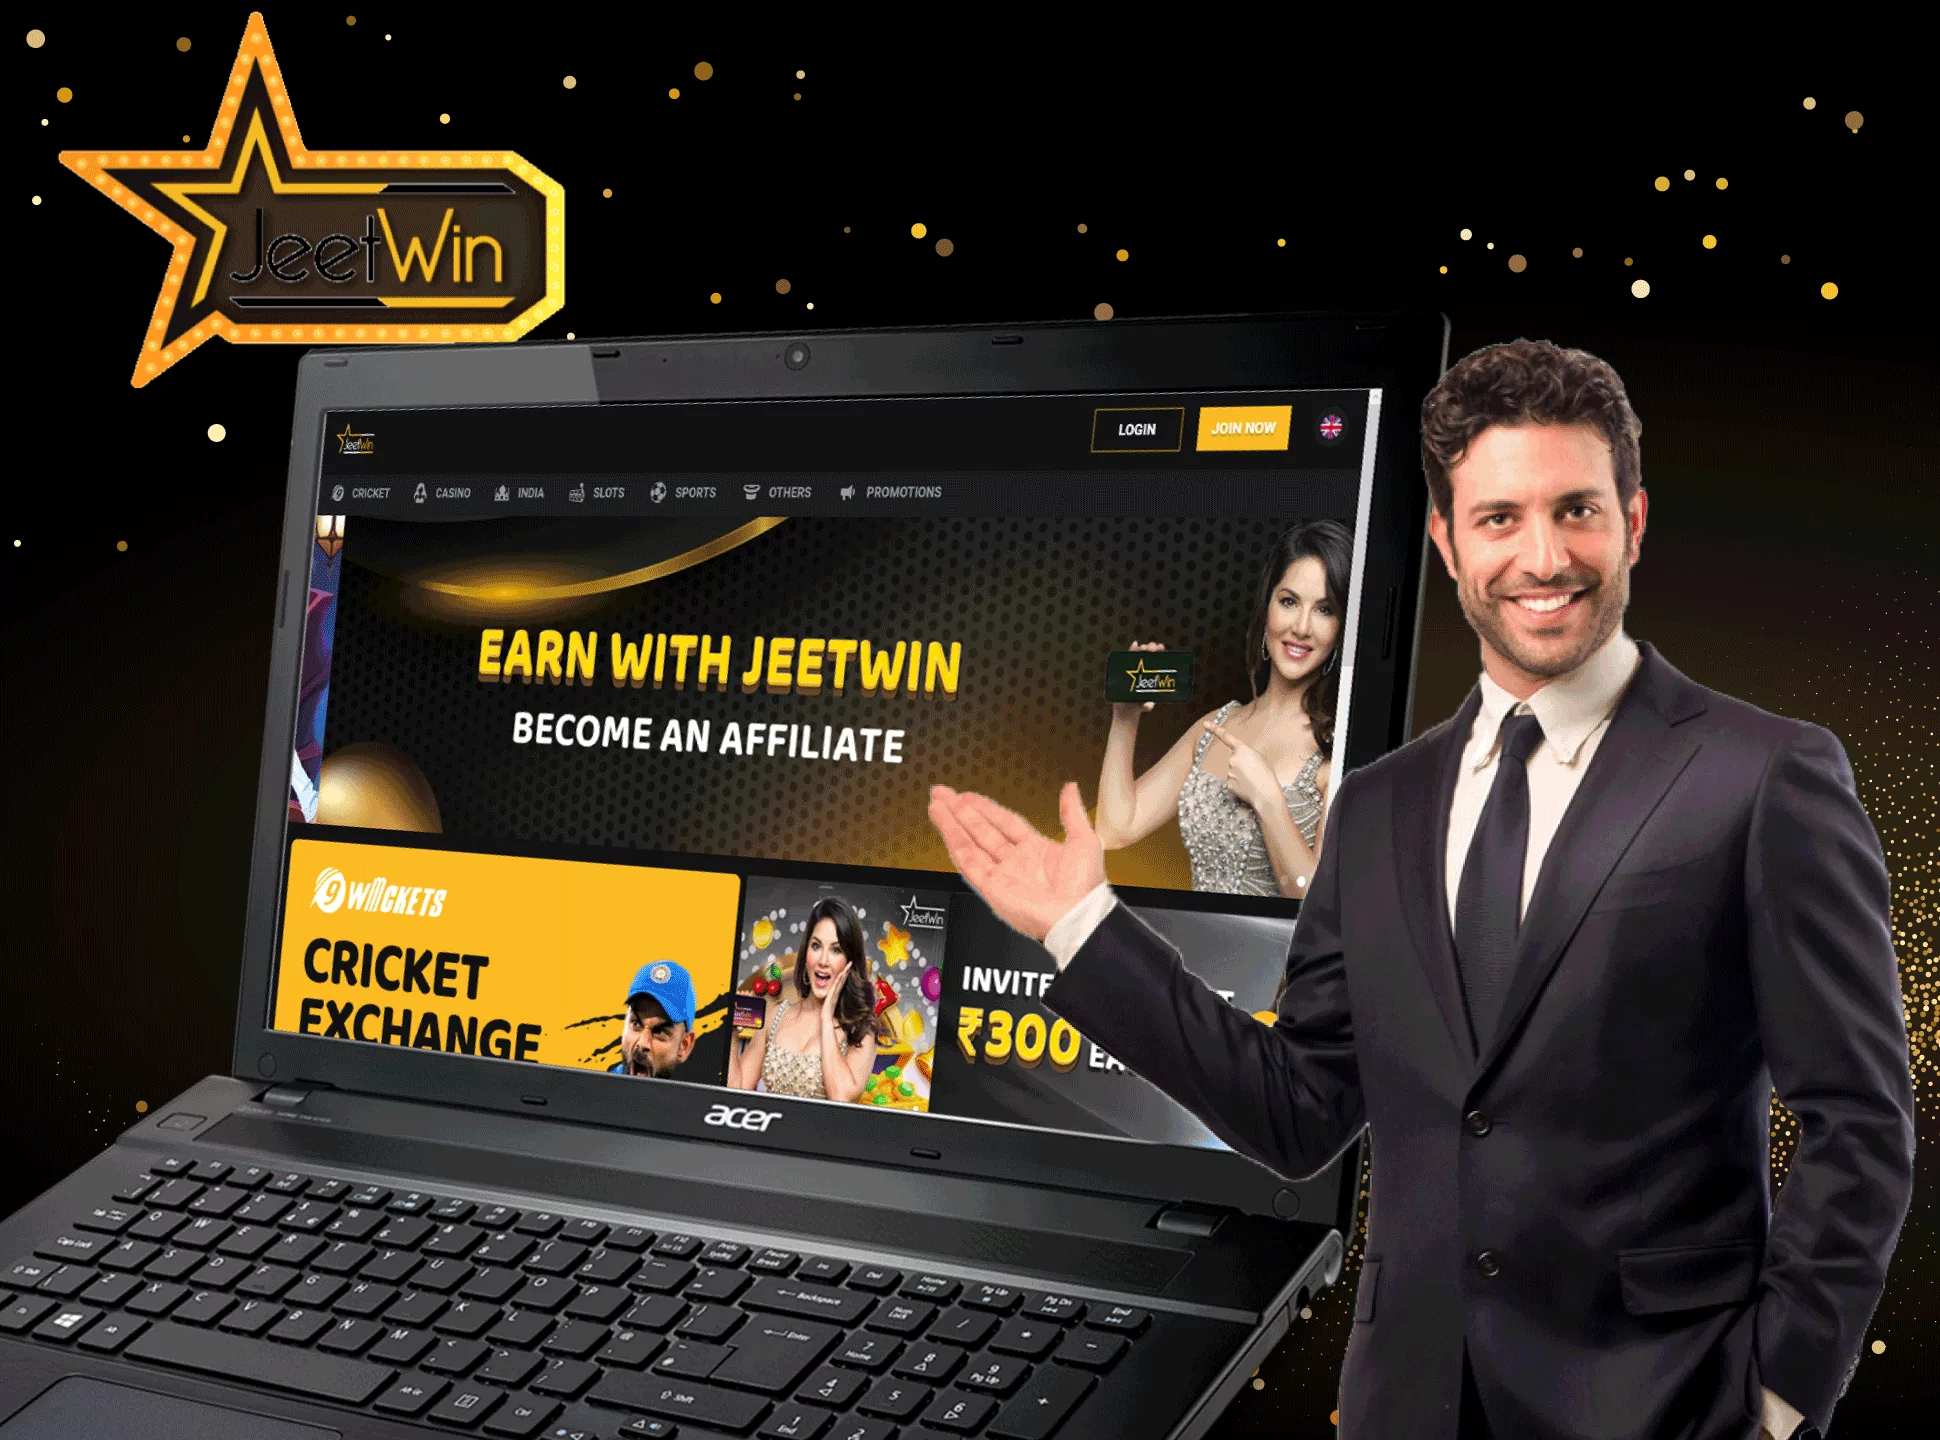 Register at Jeetwin and place bets in rupees.